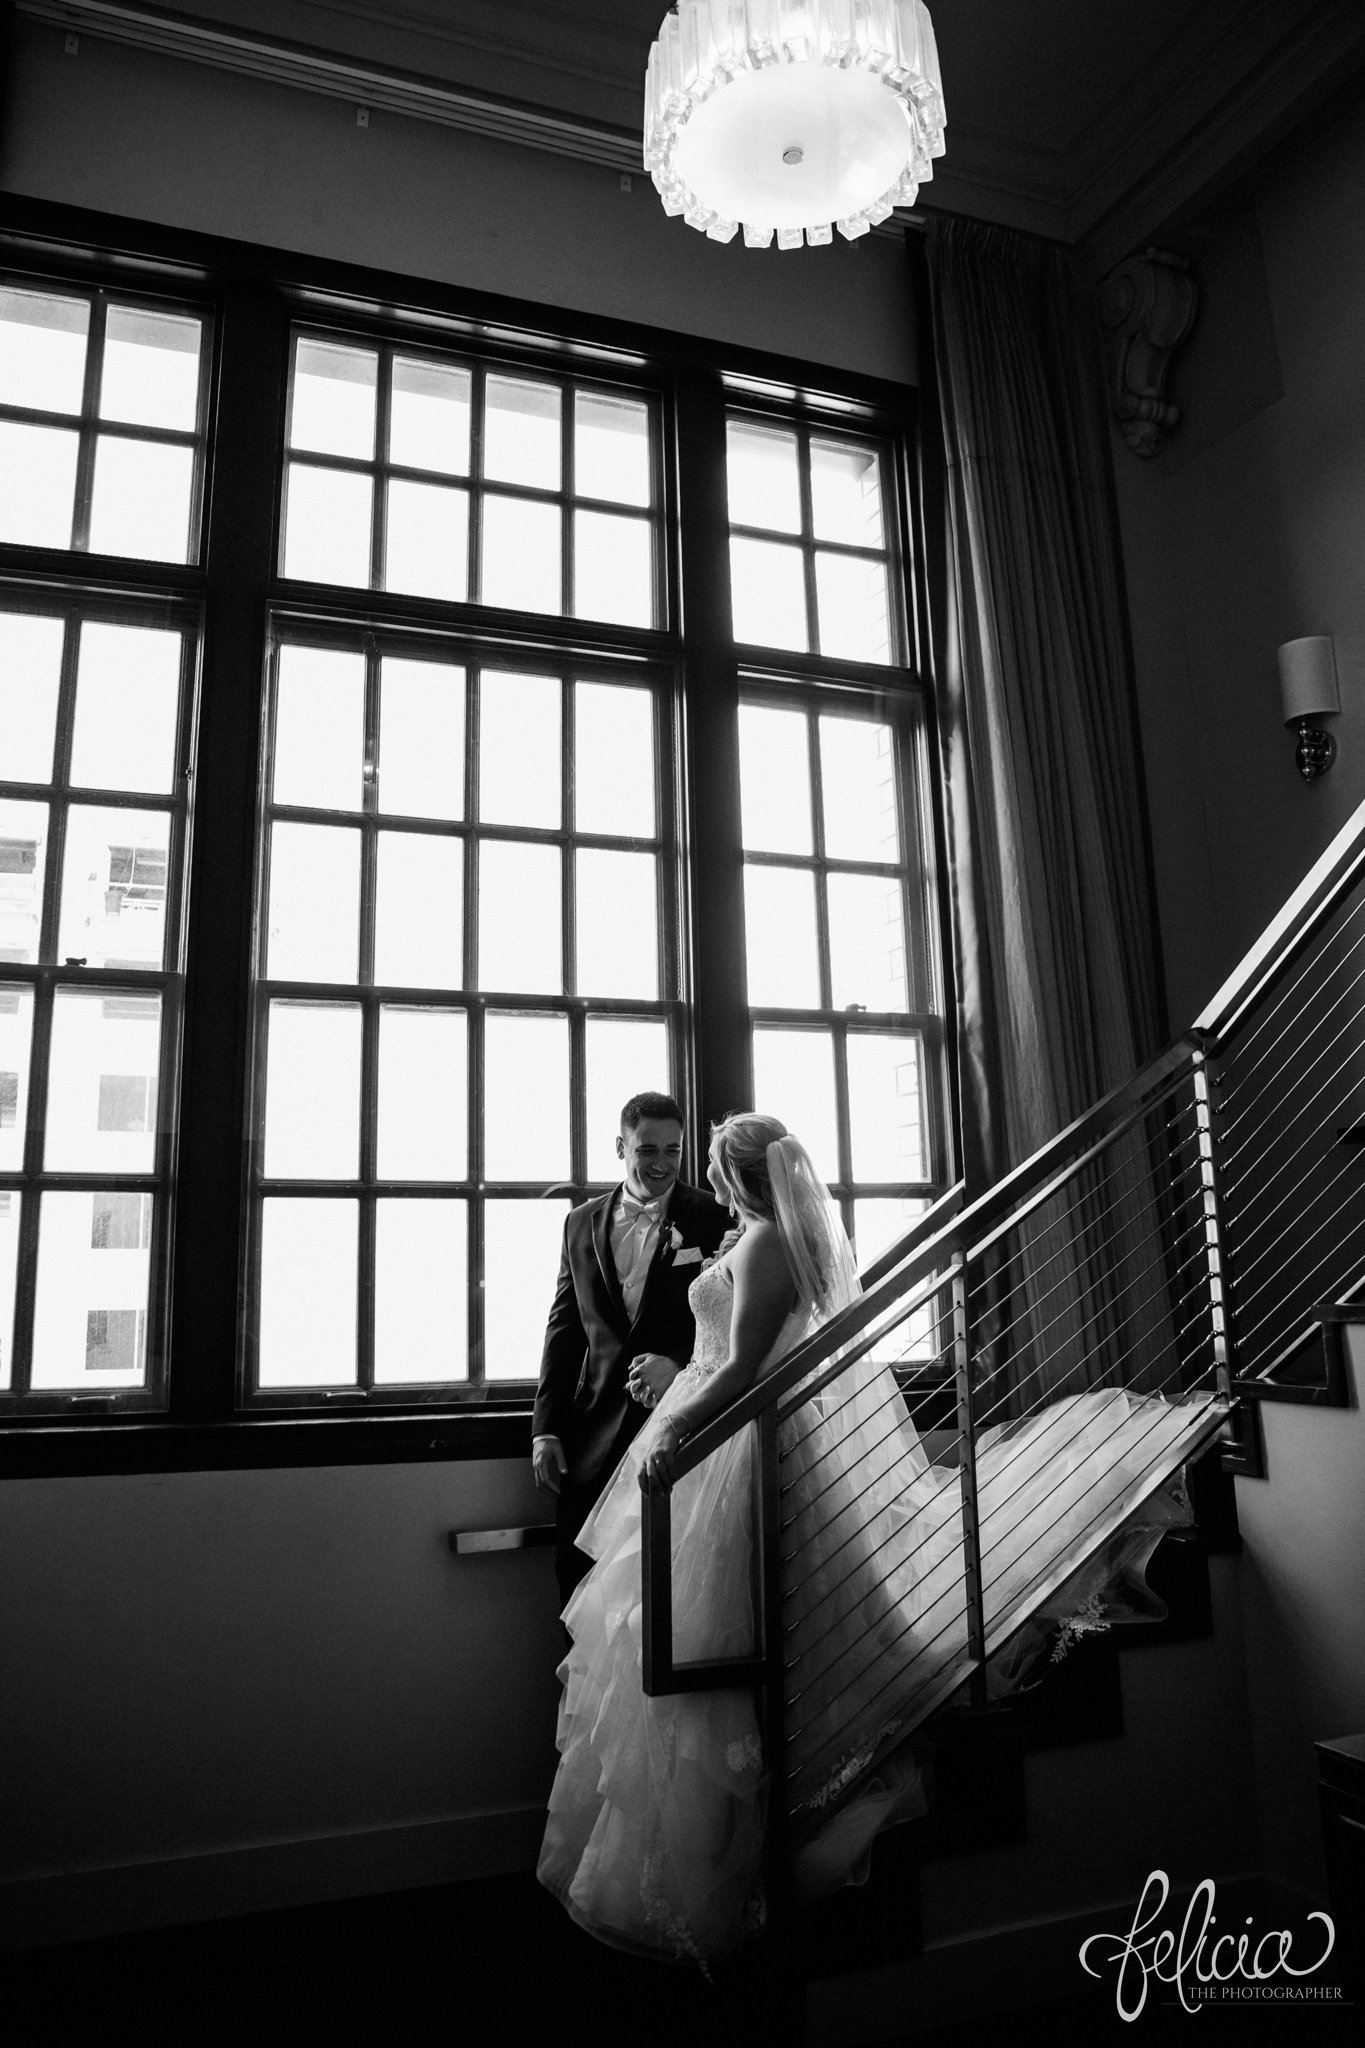 images by feliciathephotographer.com | wedding photographer | downtown kansas city | first look | hotel ambassador | natural lighting | romantic | belle vogue | mens warehouse | glamorous | intimate | black and white | 